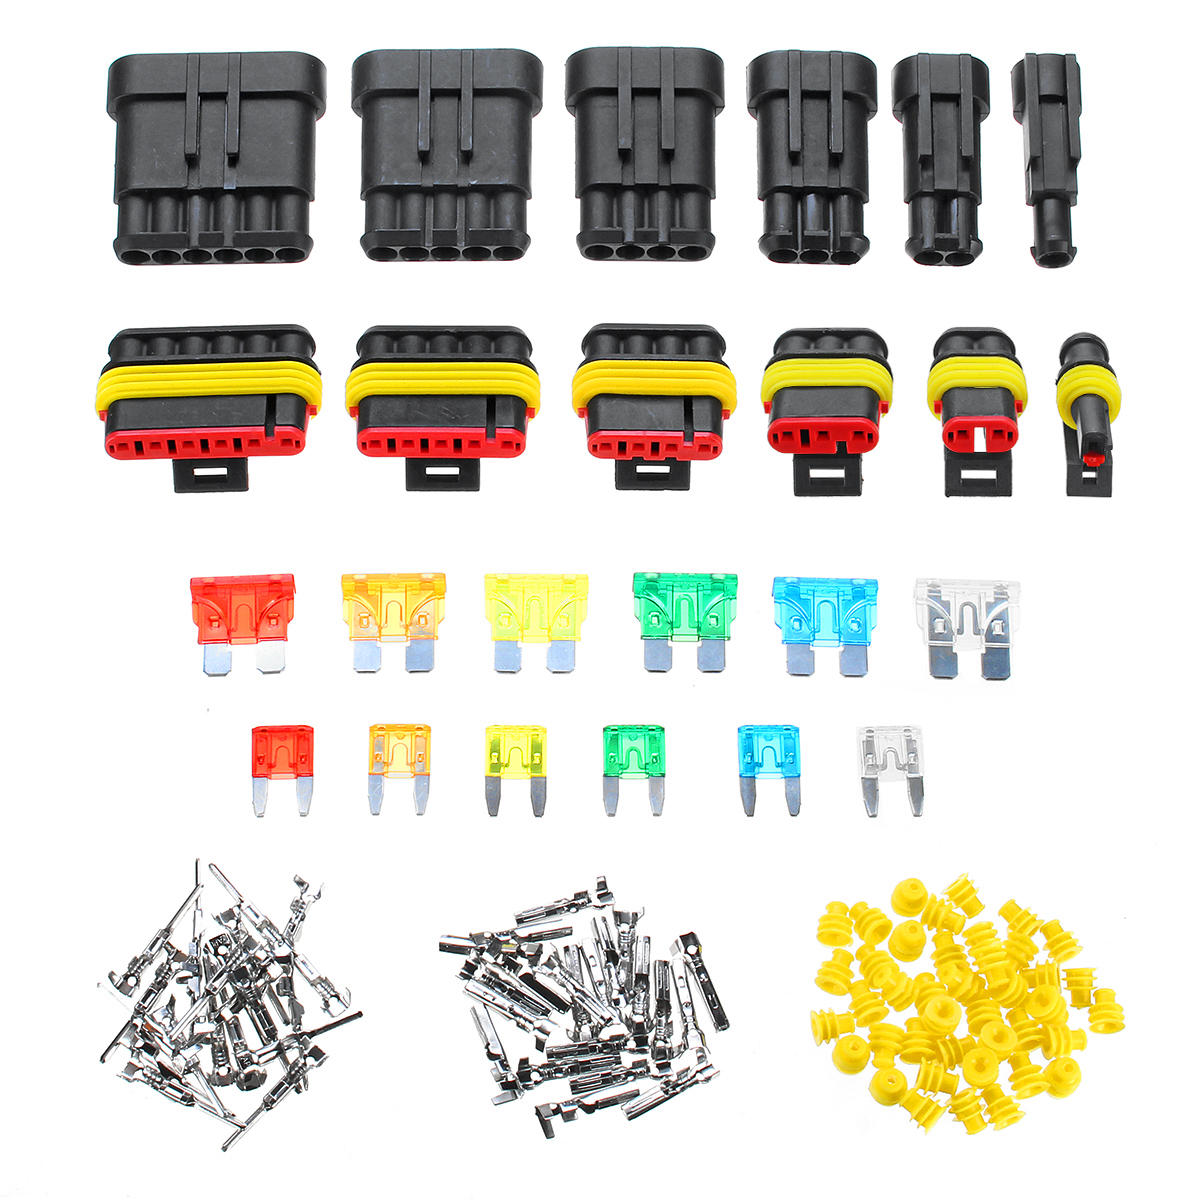 

240Pcs 1/2/3/4/5/6 Pins Car Way Waterproof Electrical Terminal Wire Connector Plug Fuses